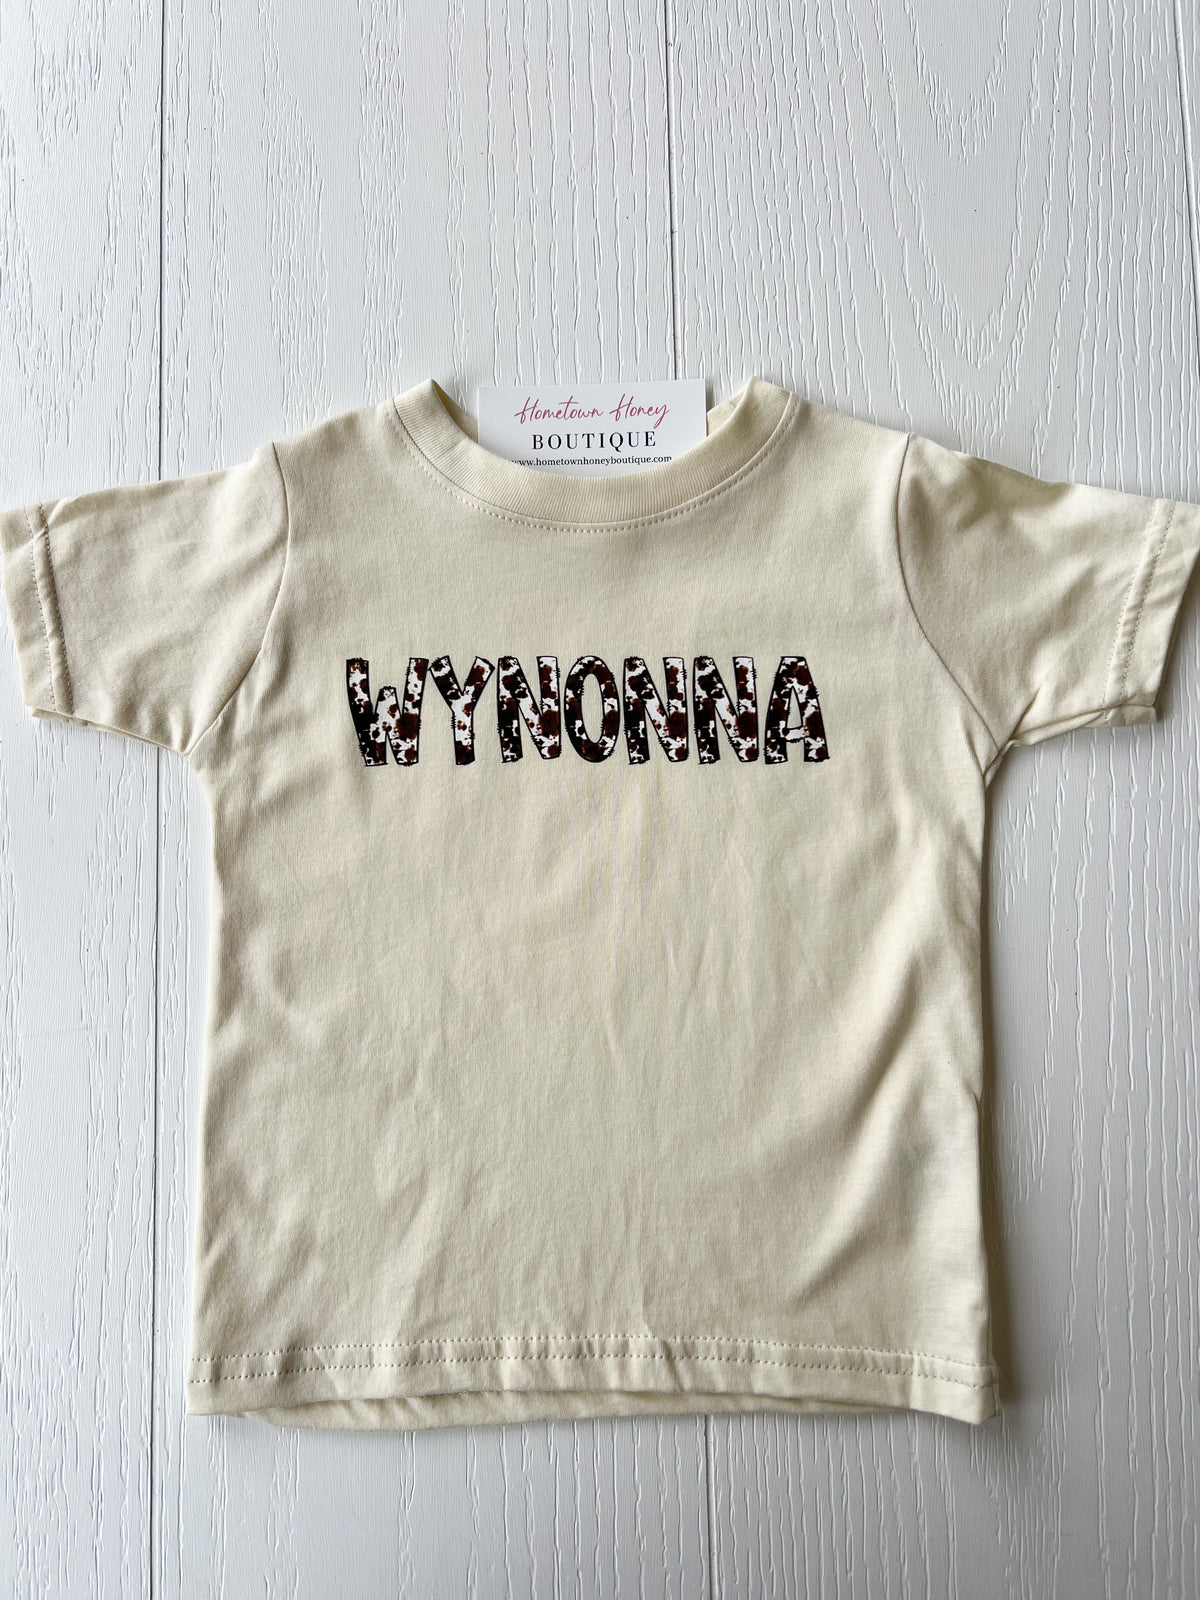 Cow Print Personalized Name Kids Graphic Tee